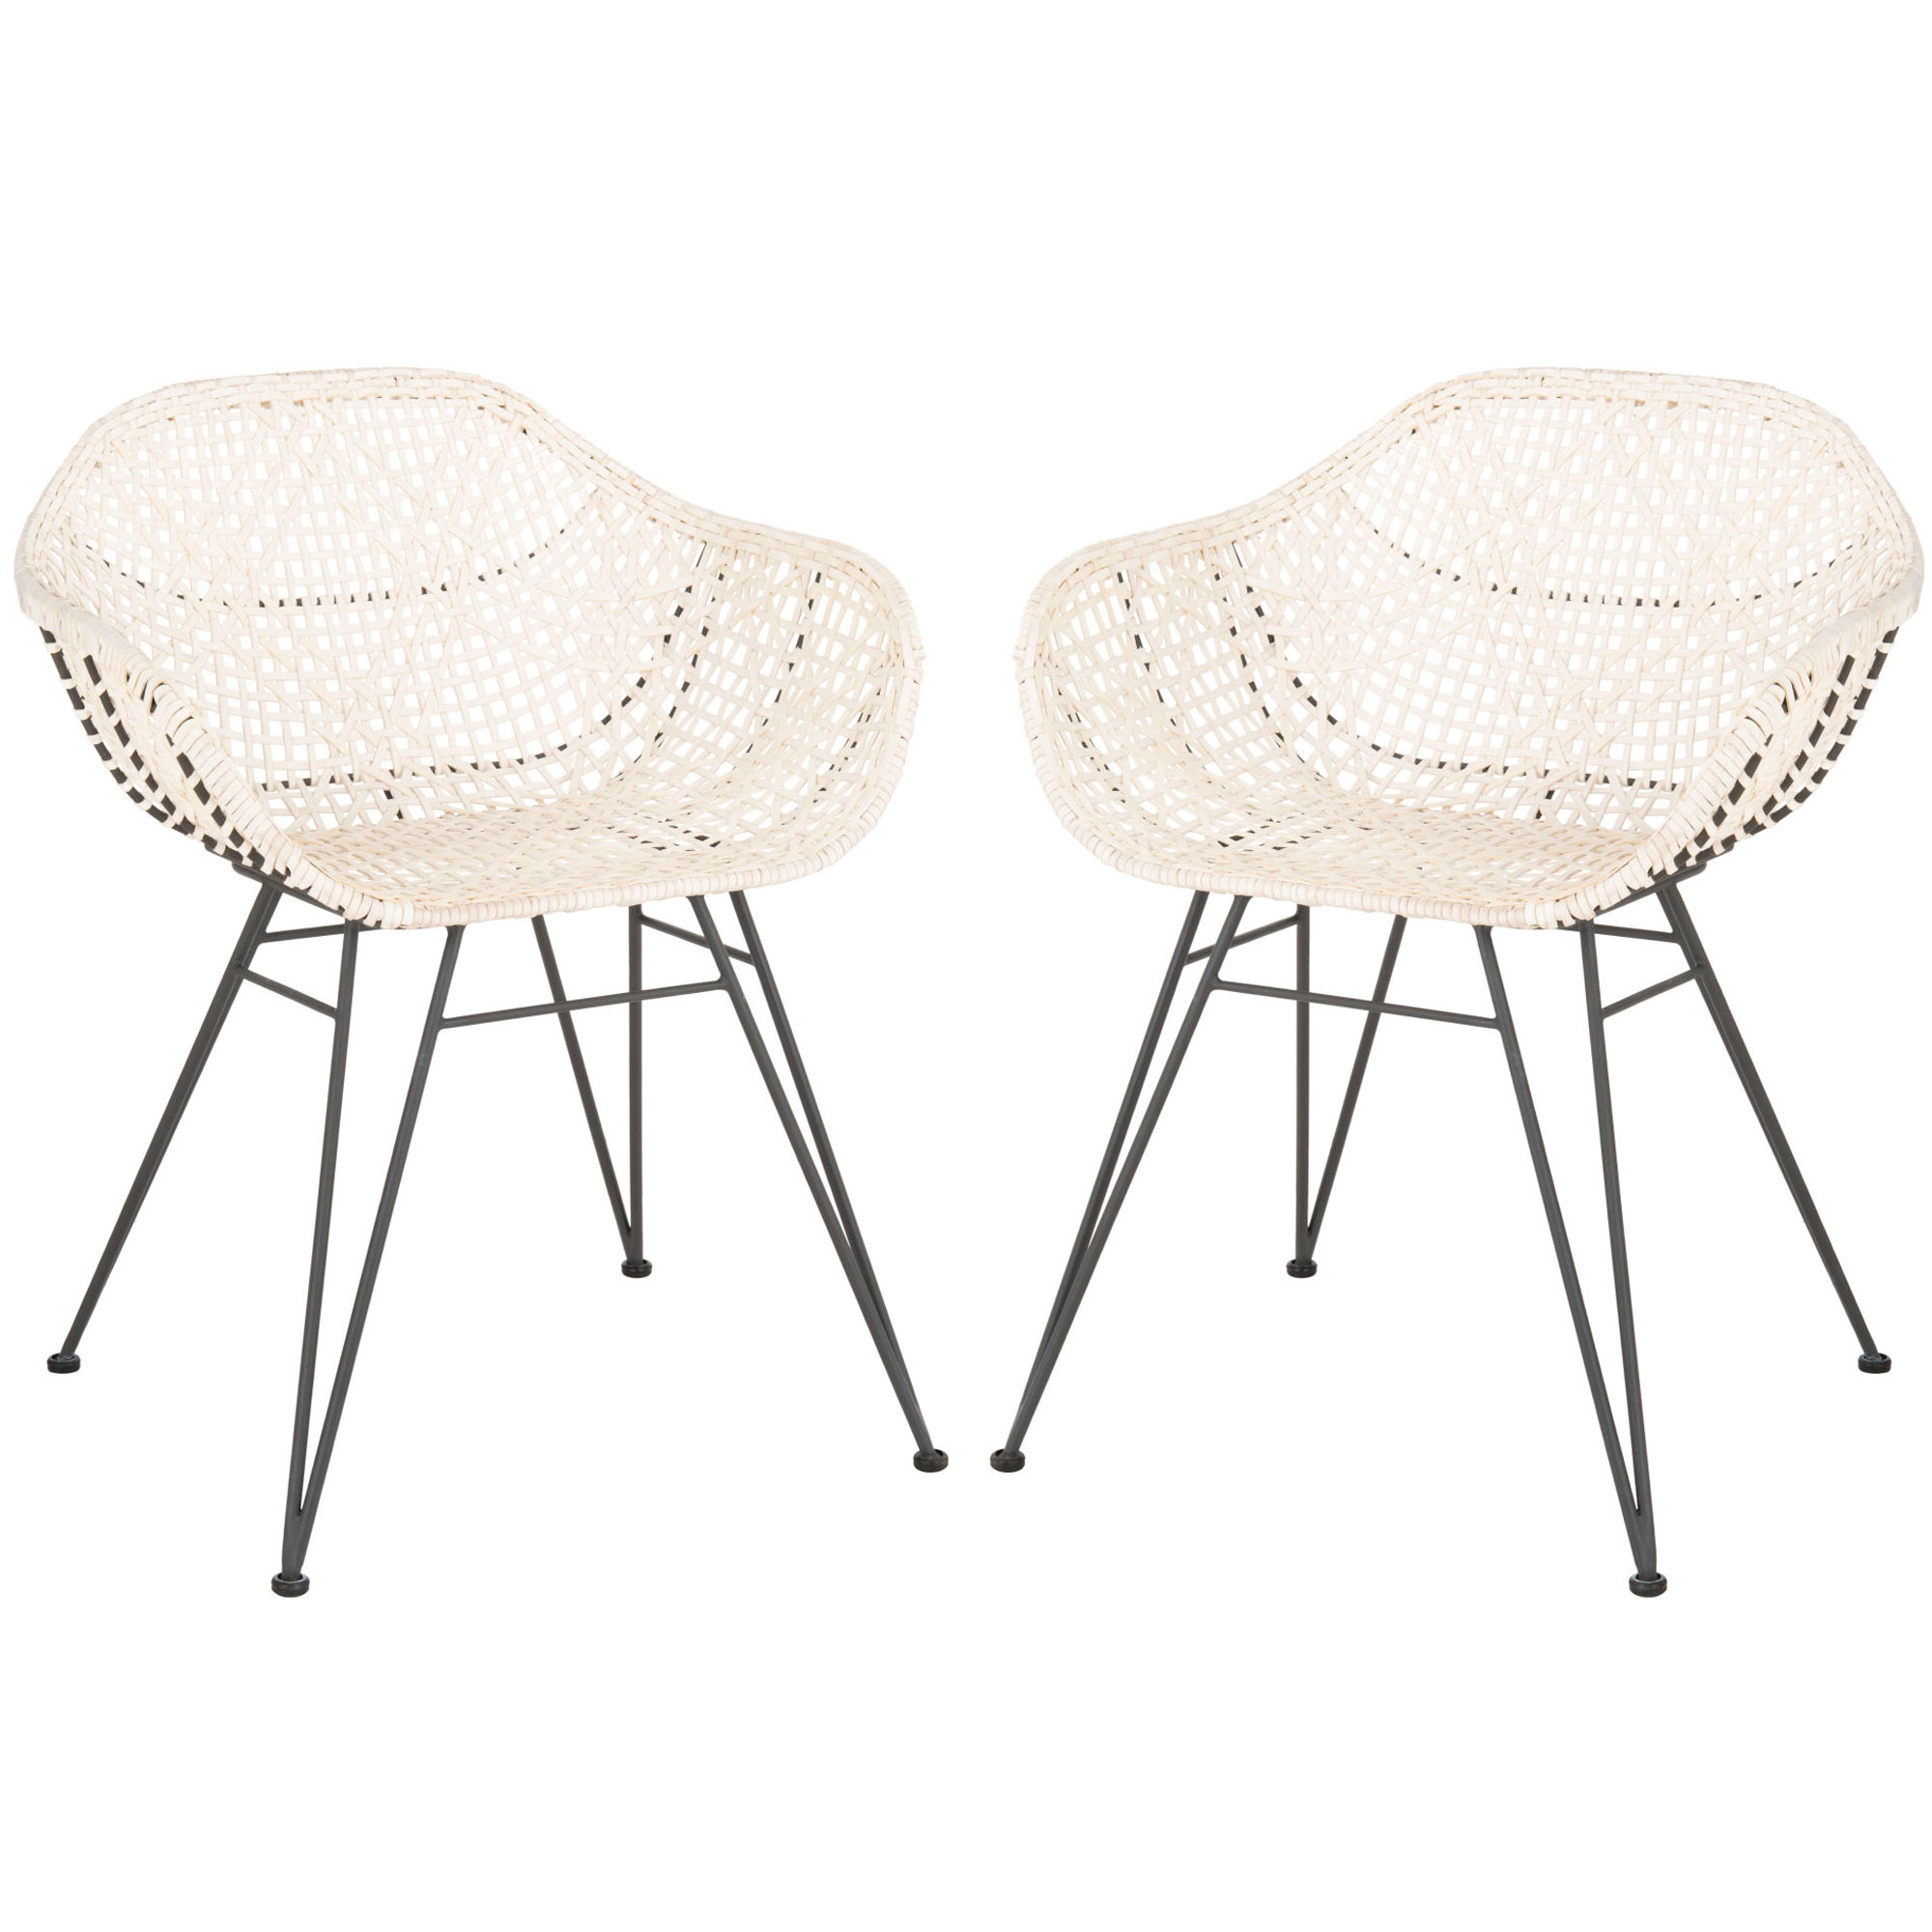 Jadis Leather Woven Dining Chair 2Set